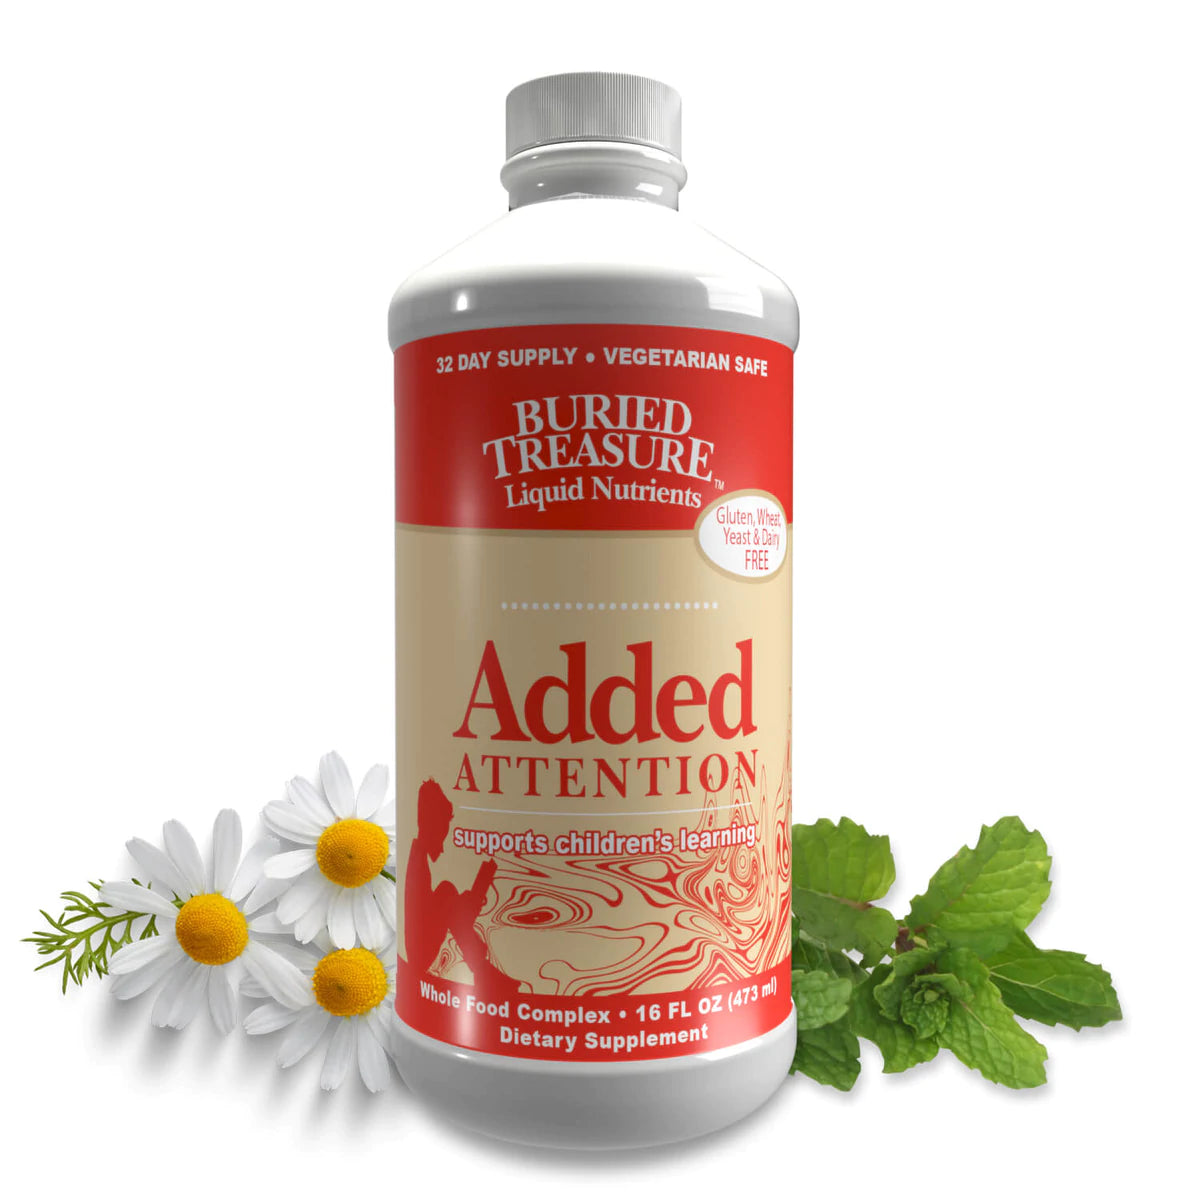 Added Attention Children's Learning and Focus Support with GABA DHA Vitamin B and Herbal Blend